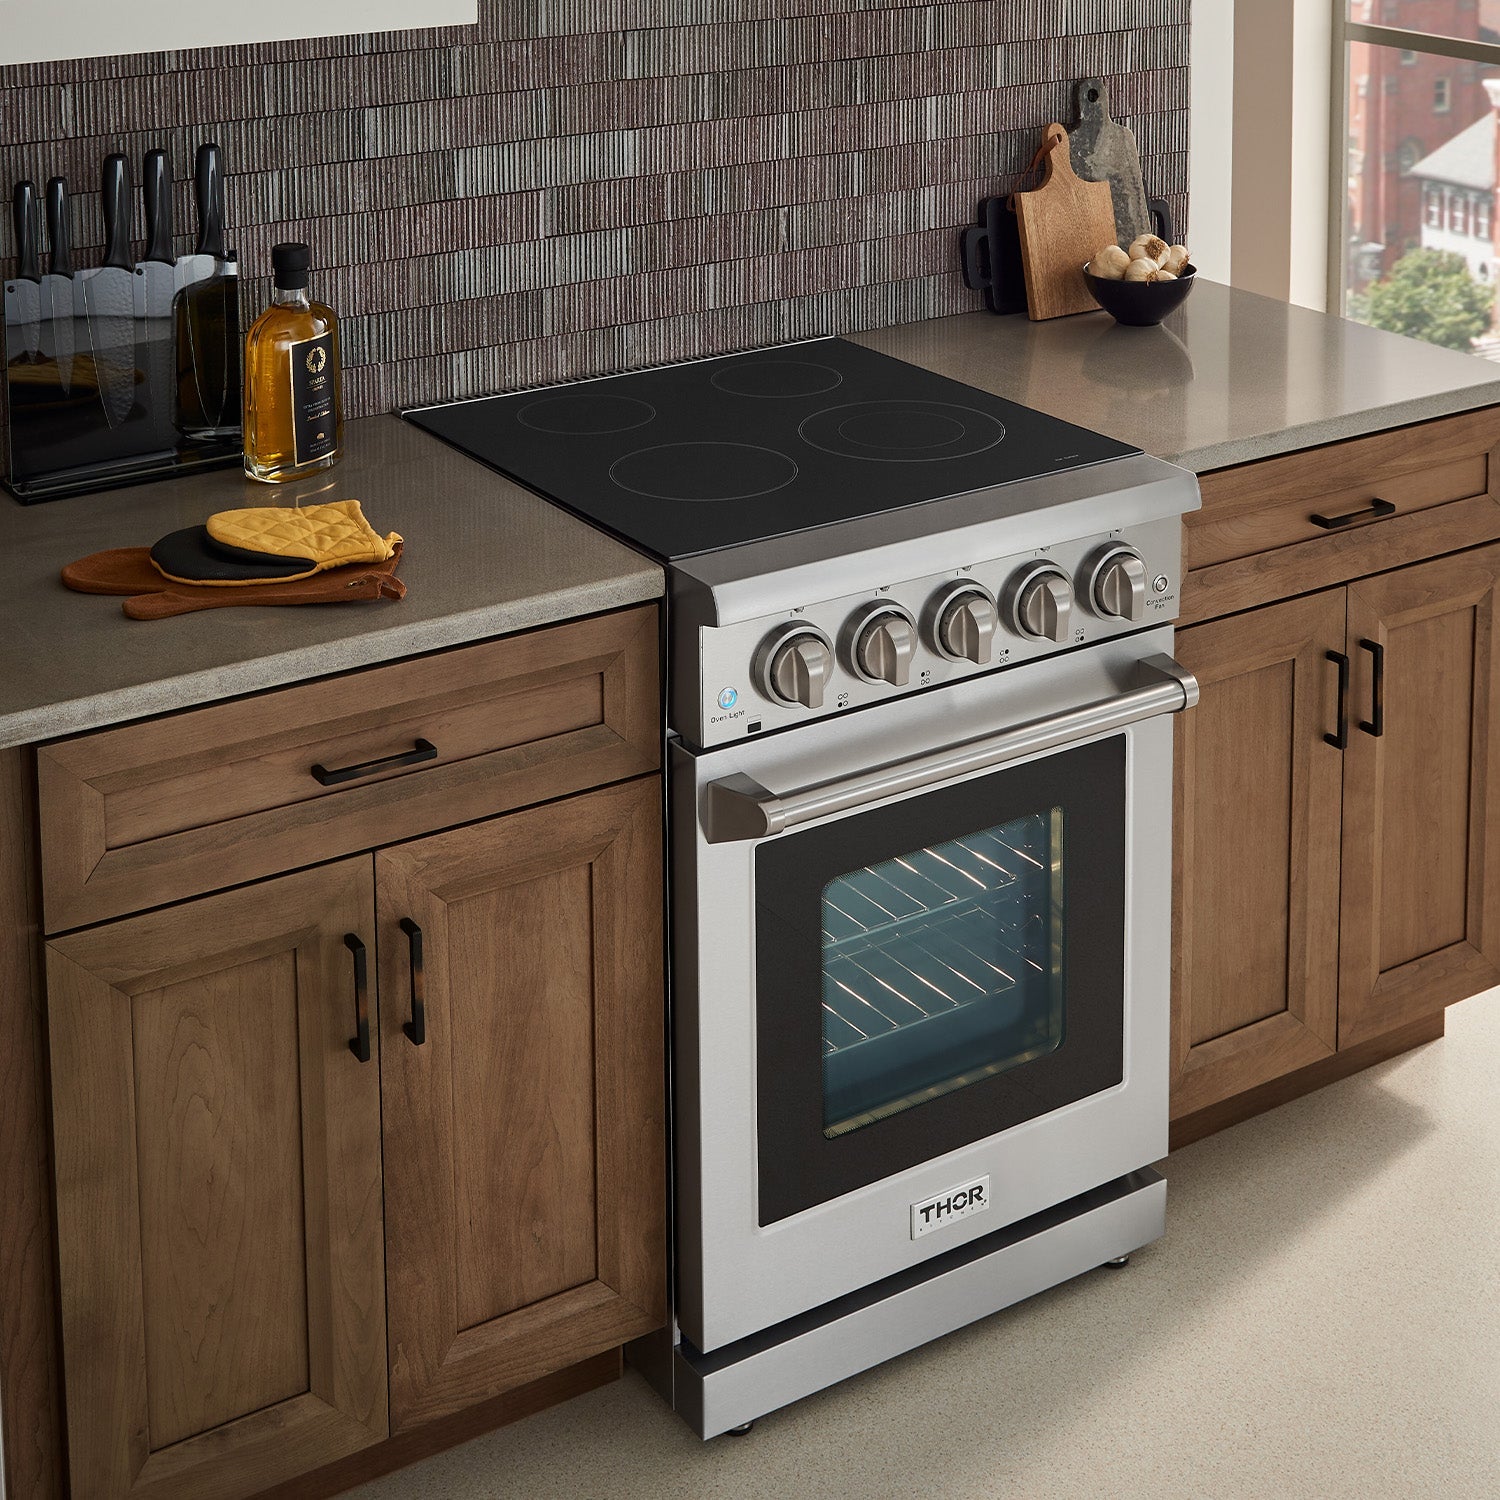 http://www.sindacopper.com/cdn/shop/products/thor-24-inch-373-cu-ft-professional-electric-range-in-stainless-steel-hre2401sindasinda-copper-323075.jpg?v=1697013836